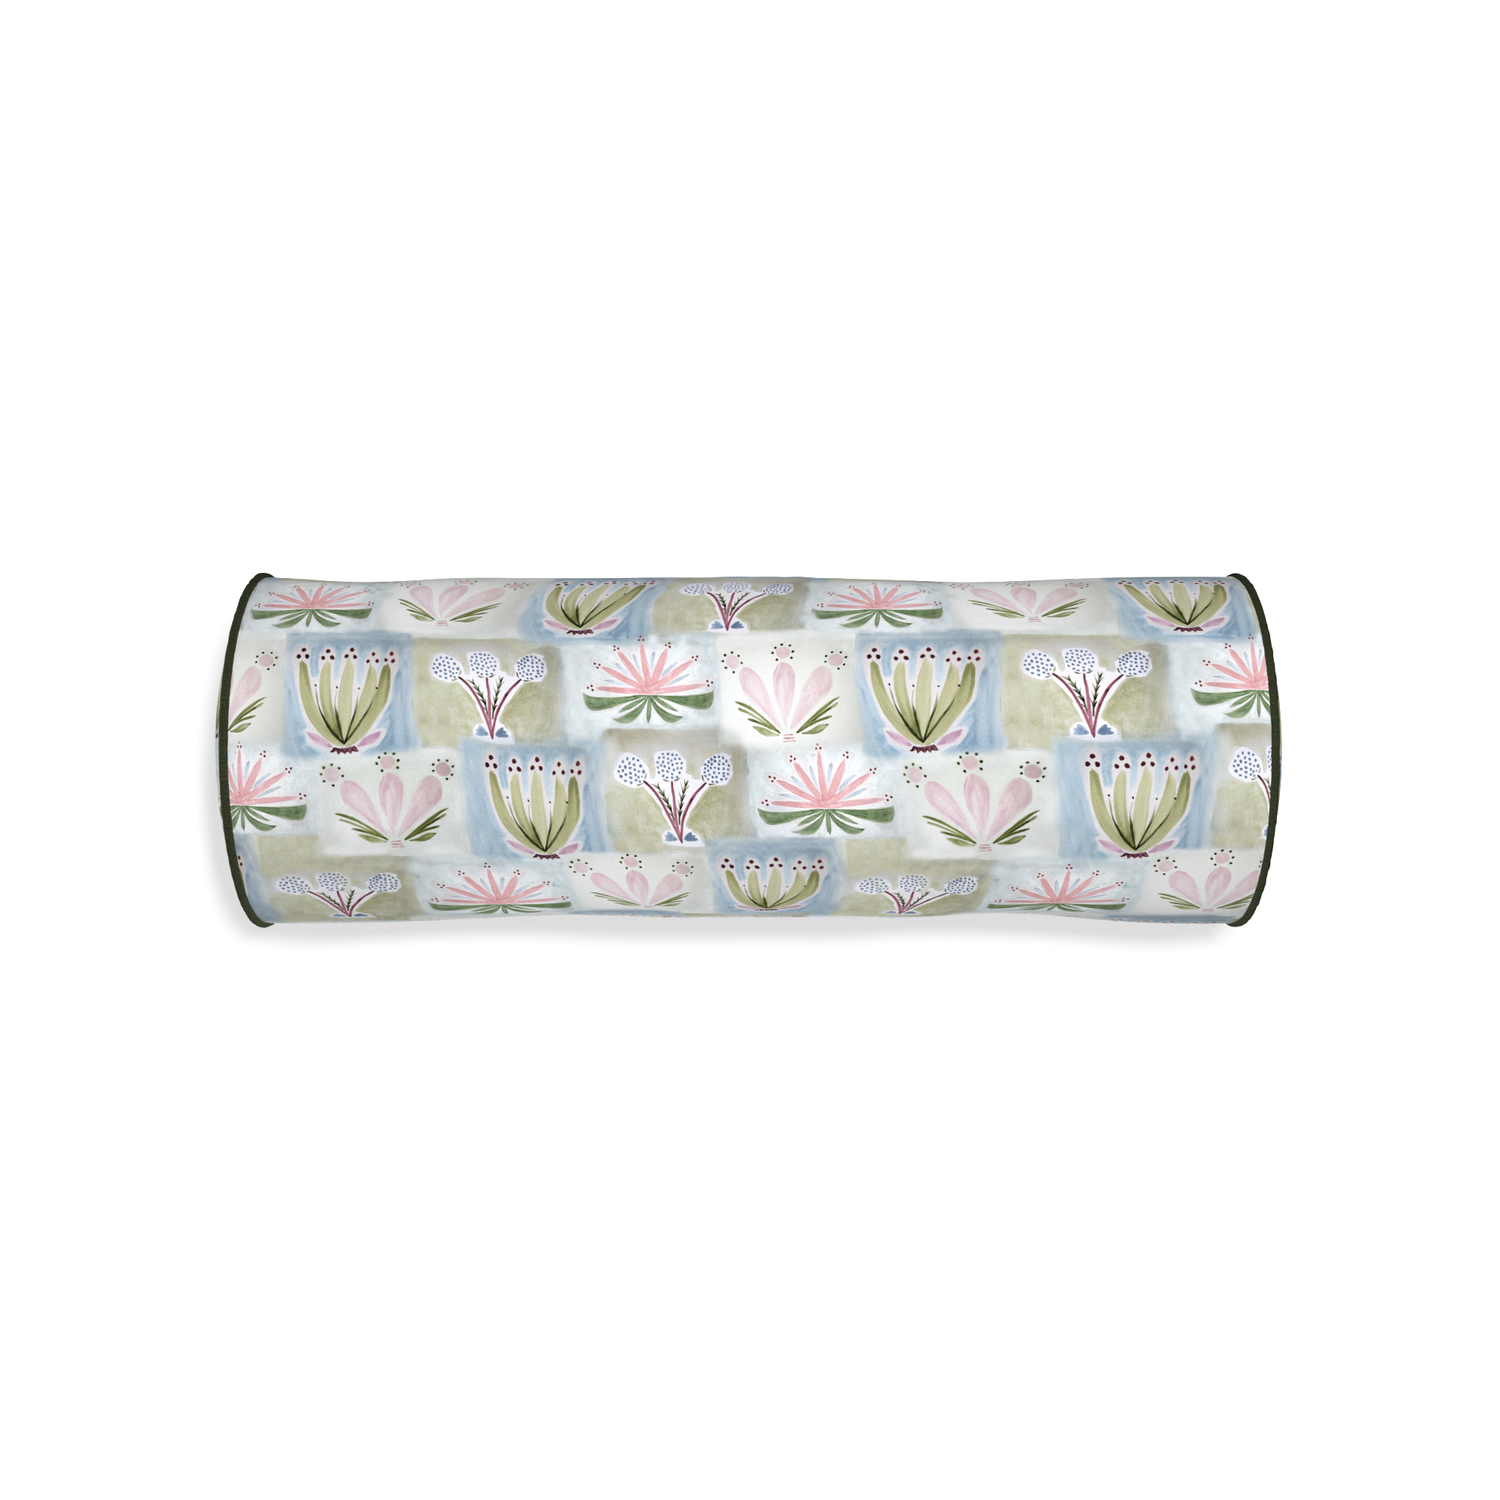 Bolster harper custom hand-painted floralpillow with f piping on white background